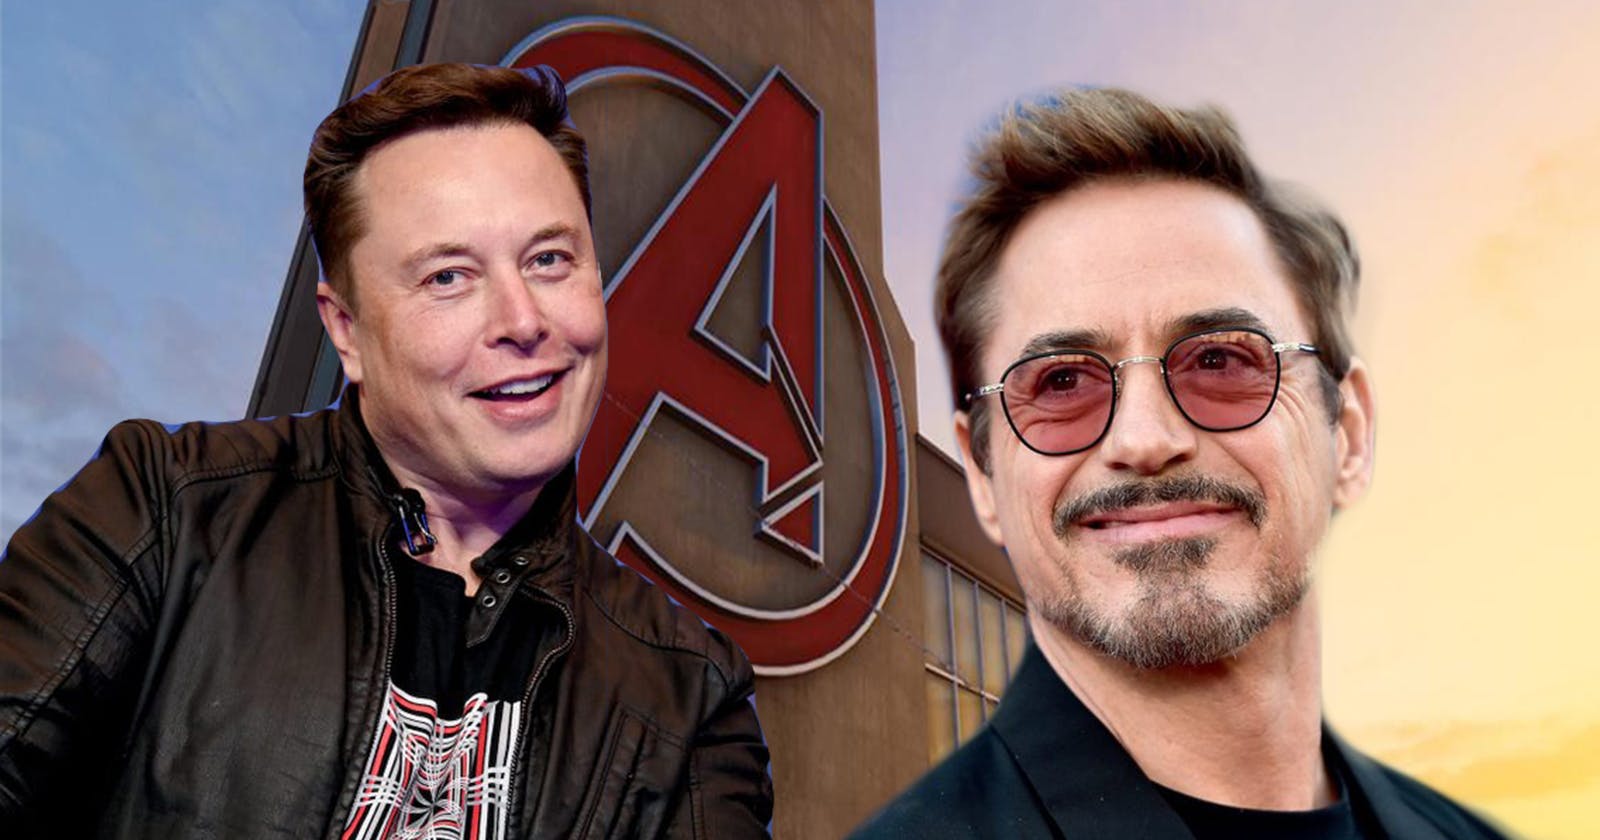 Can We Make an AI🤖 understand Elon Musk and Tony Stark are different people?